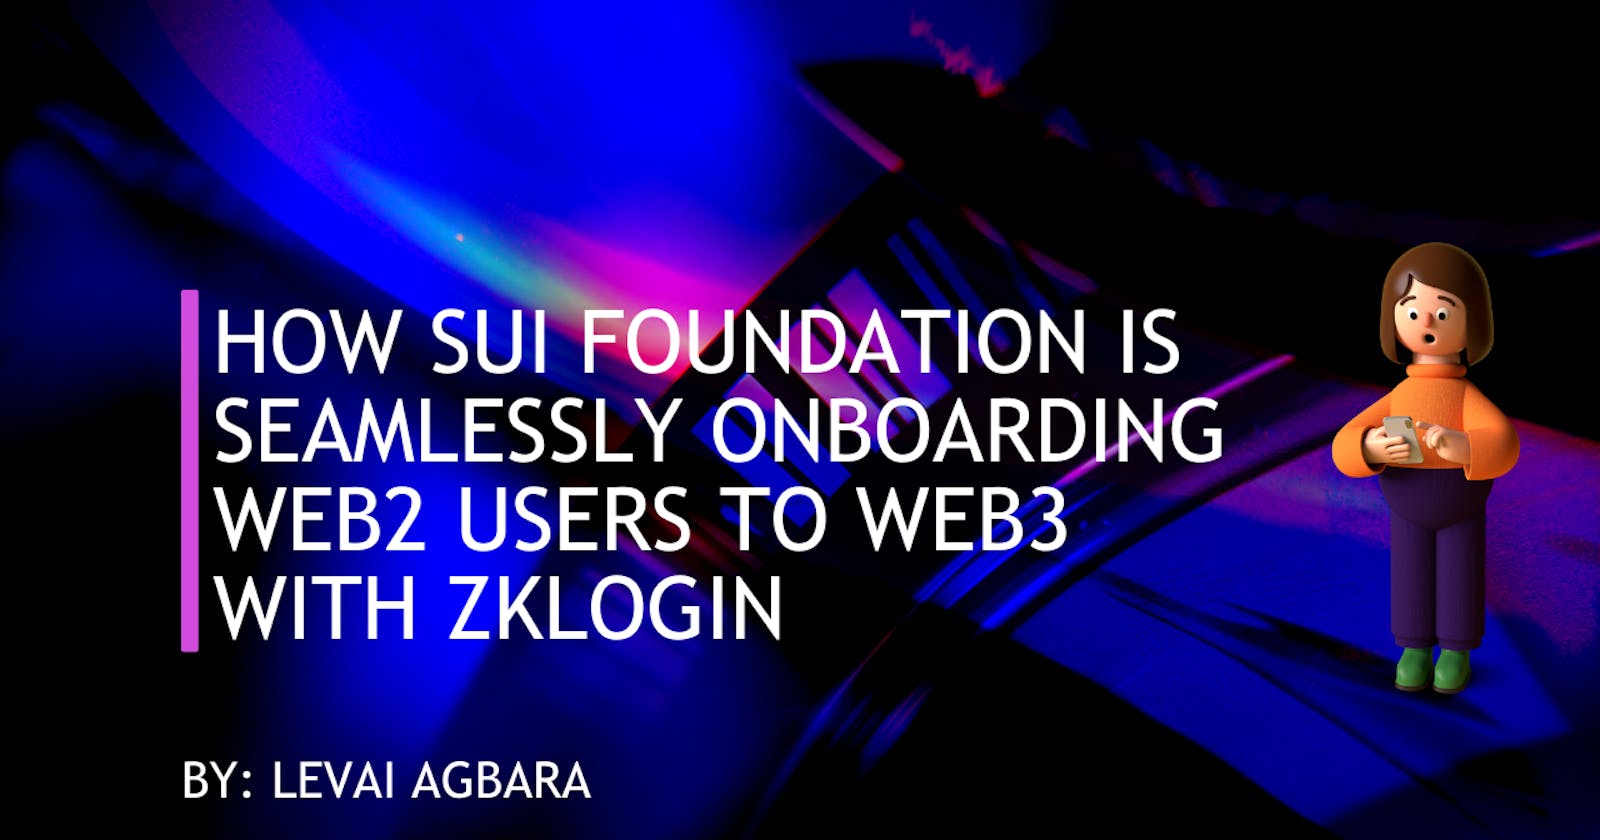 How Sui Foundation is seamlessly onboarding Web2 users to Web3 with zkLogin